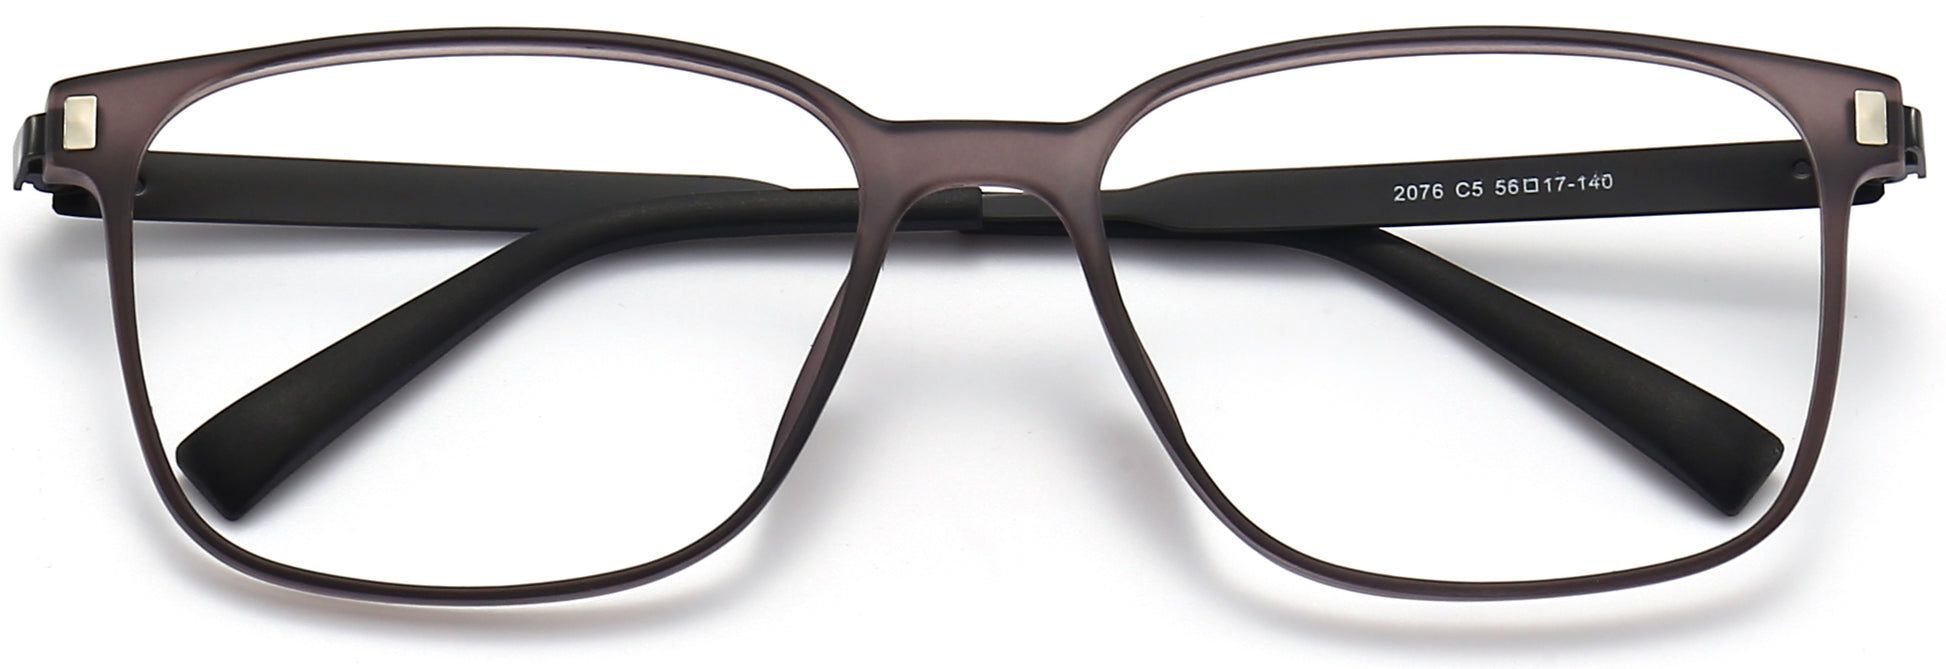 Cullen Square Gray Eyeglasses from ANRRI, closed view